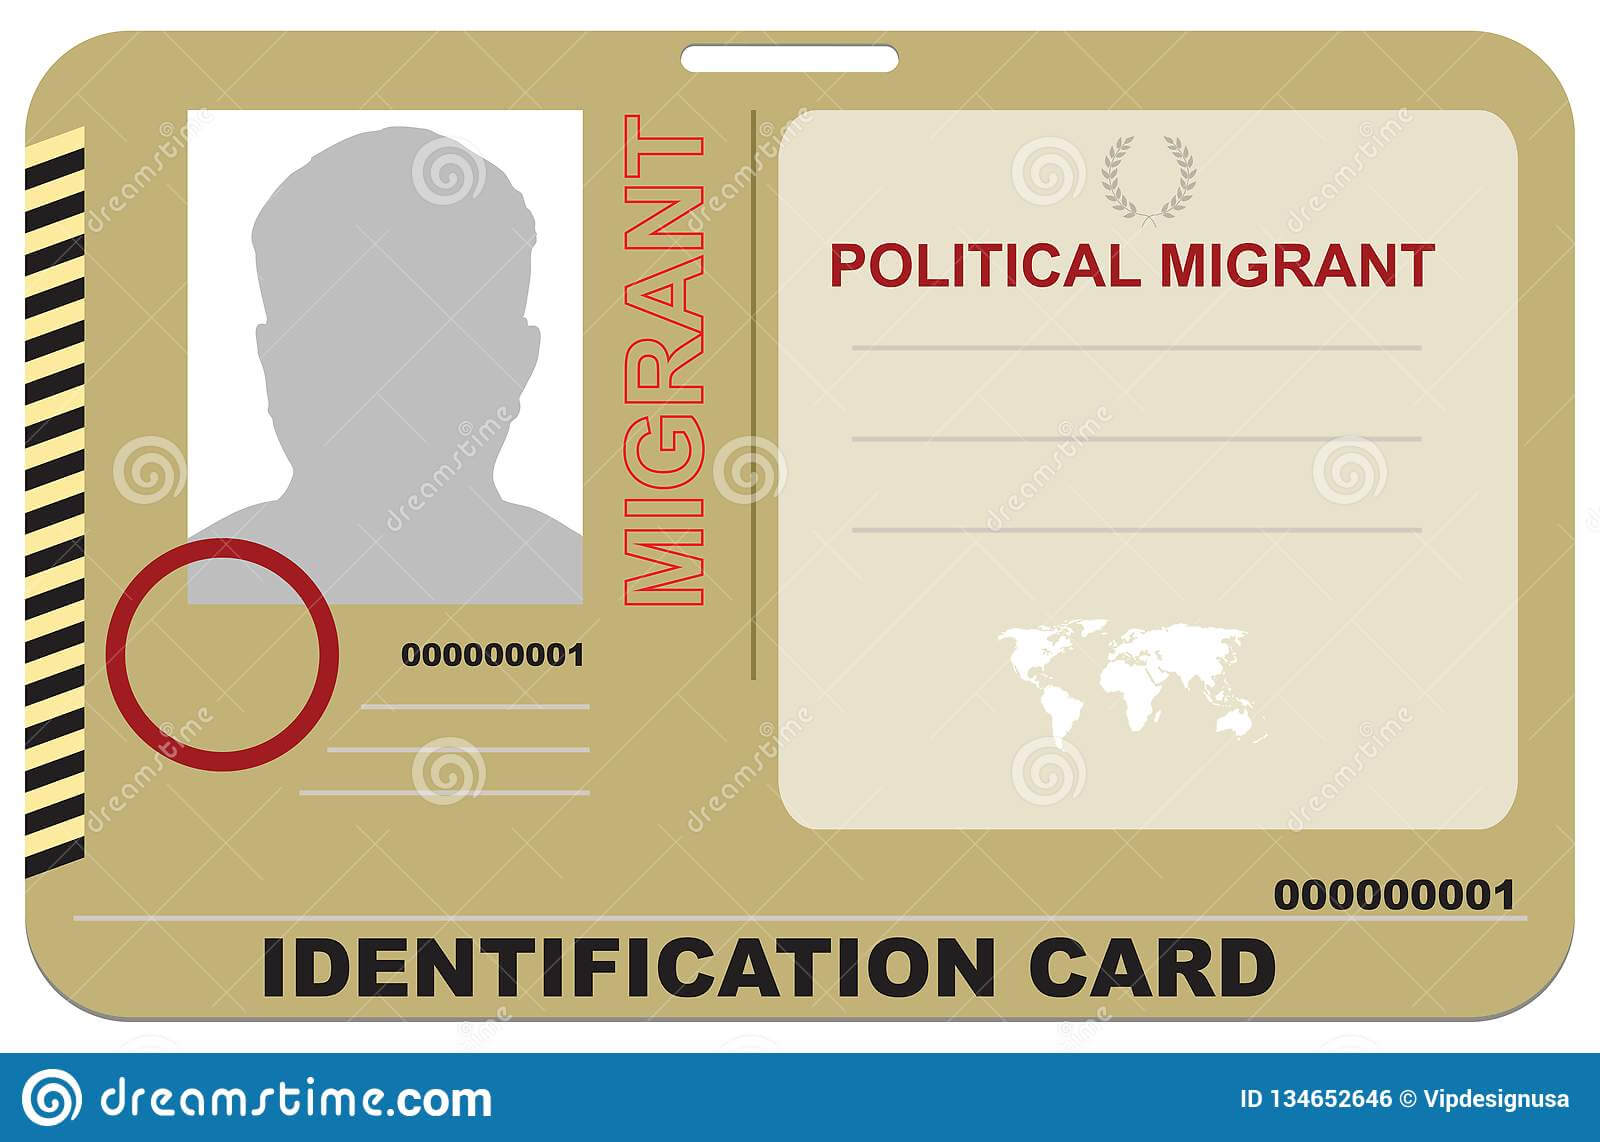 Identification Card Political Migrant Stock Vector For Mi6 Id Card Template